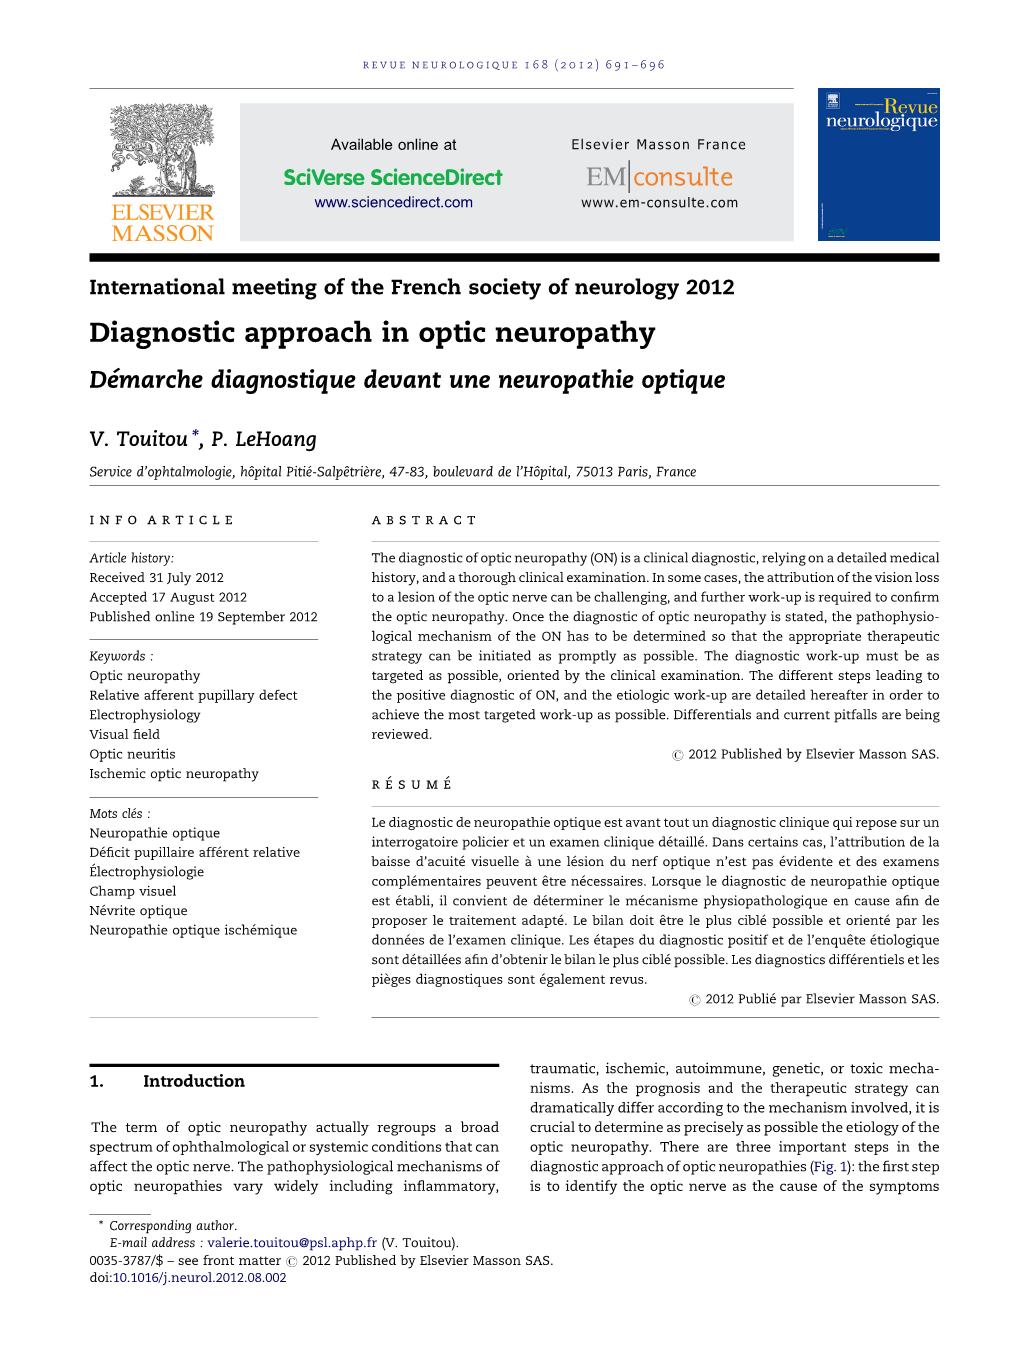 Diagnostic Approach in Optic Neuropathy